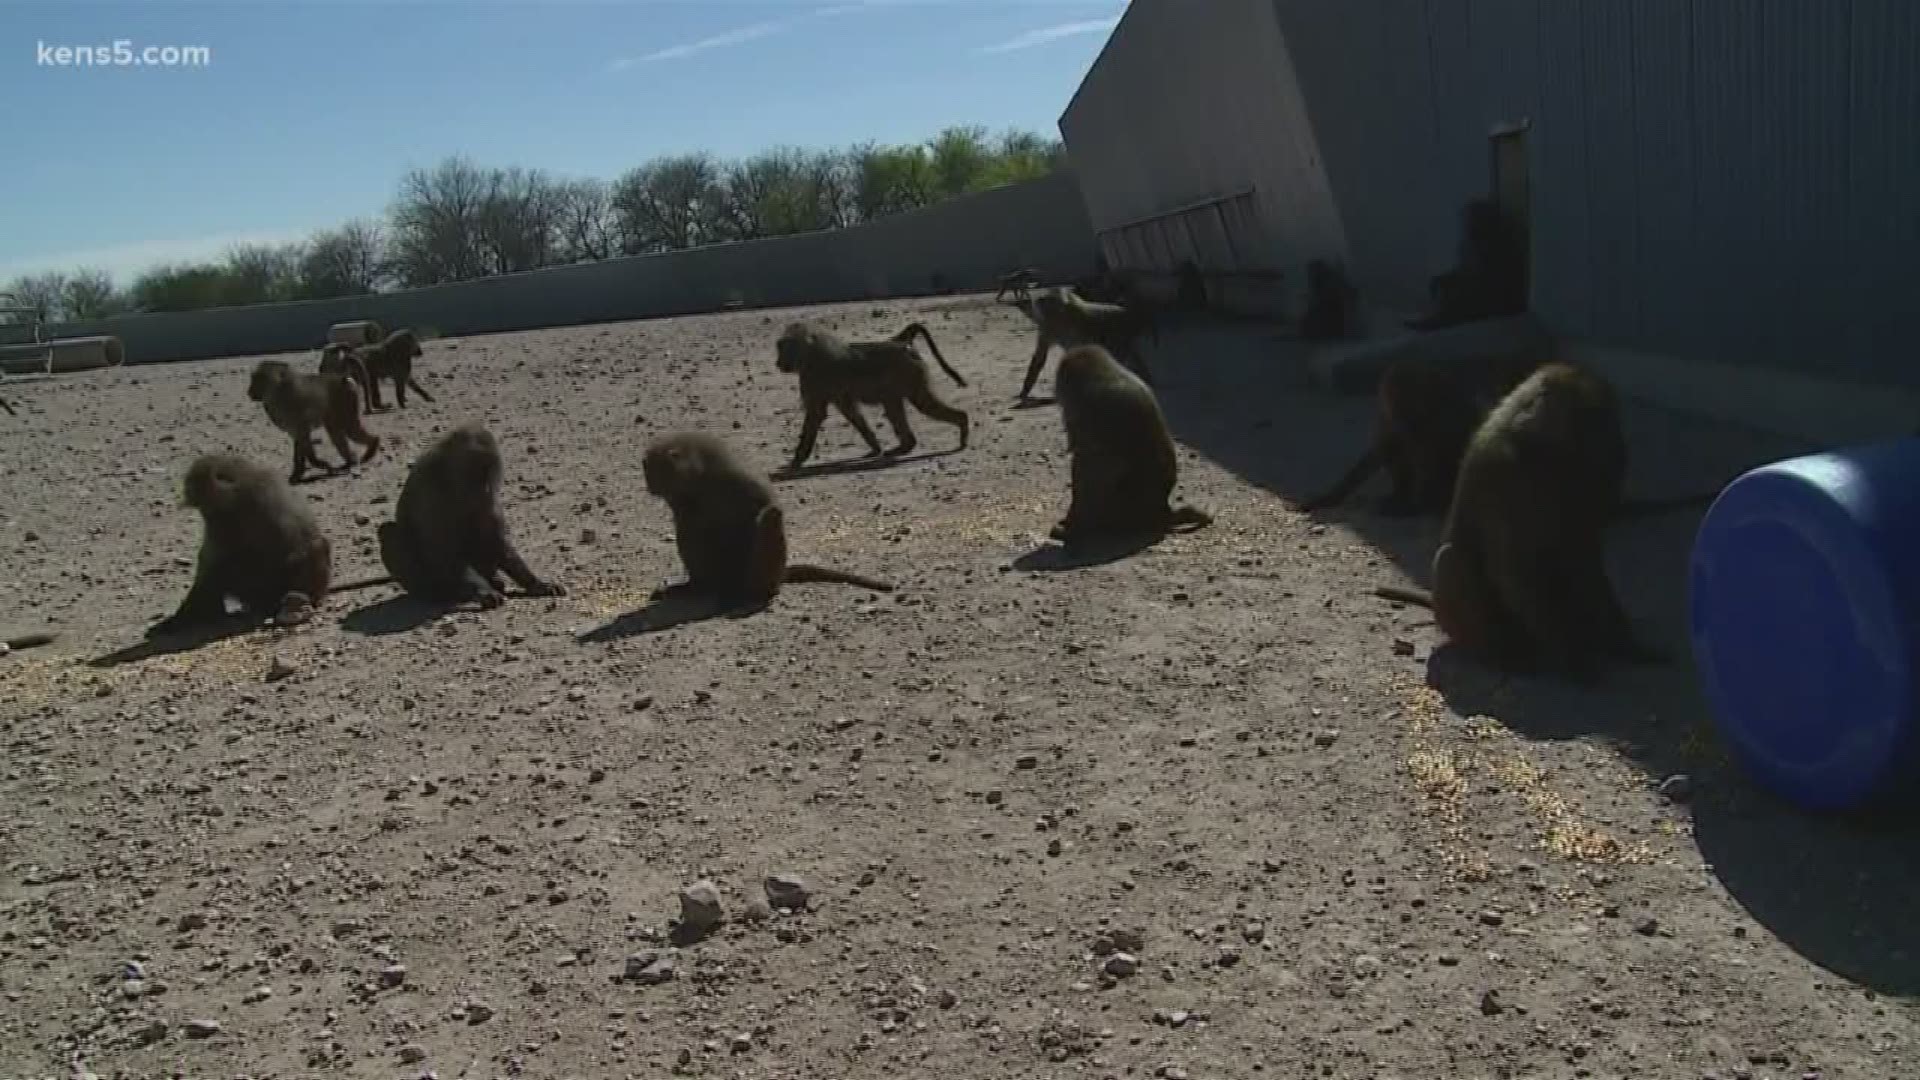 After four baboons escaped their outdoor enclosure at the Texas Biomedical Research Institute on Saturday, Eyewitness News reporter Jeremy Baker tells us how the primates managed to get out. (Some video courtesy of Texas Biomedical Research Institute.)